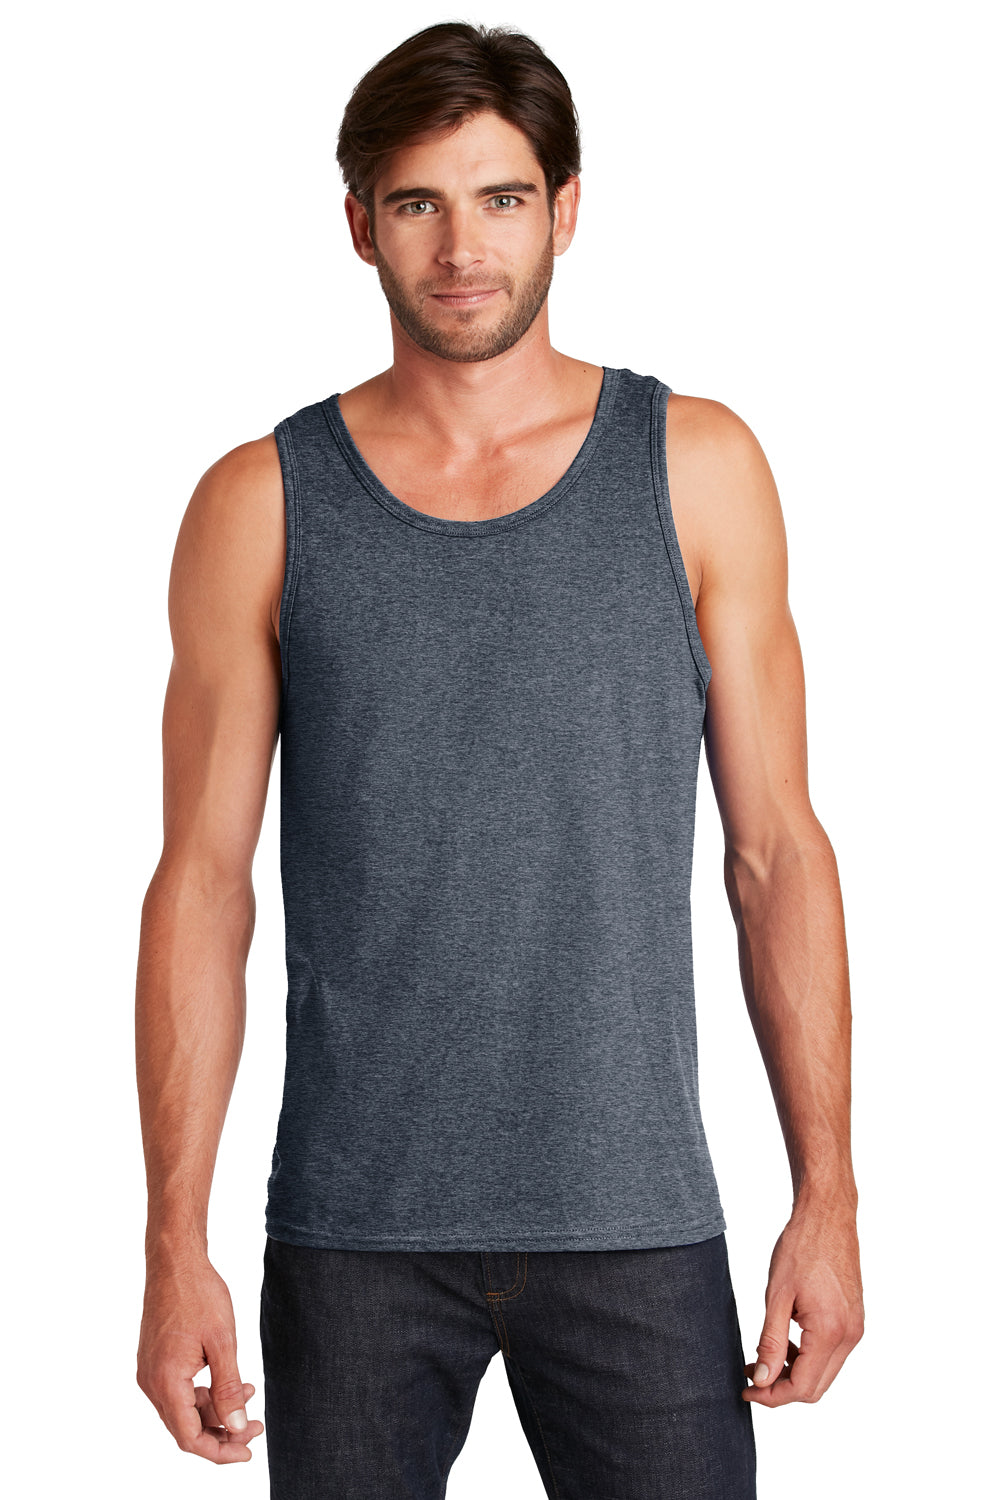 District DT5300 Mens The Concert Tank Top Heather Navy Blue Front